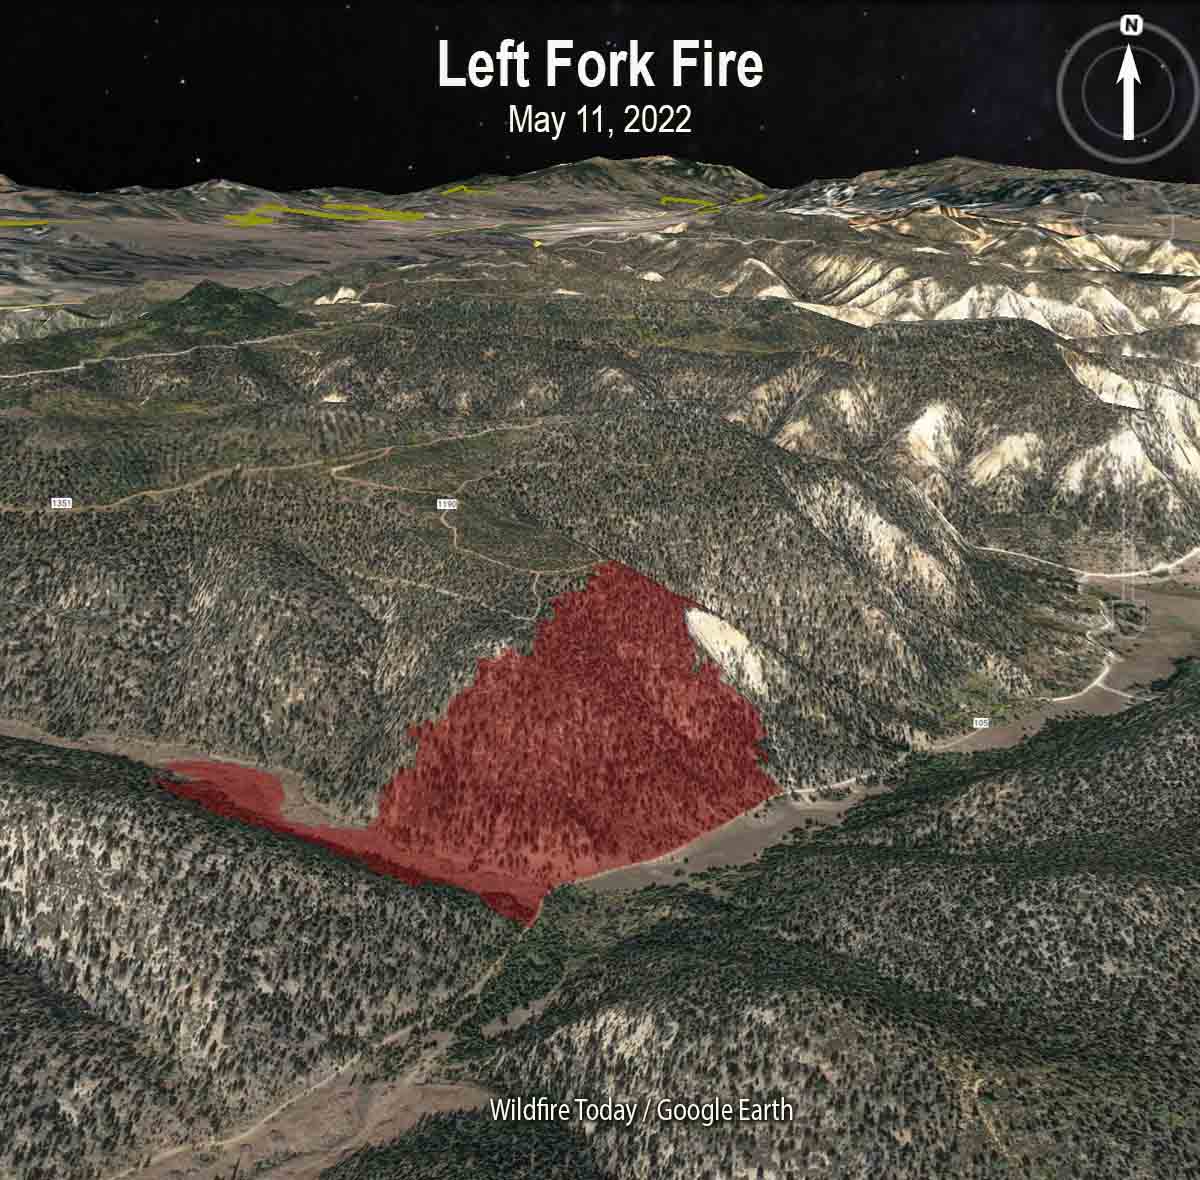 Left Fork Fire 3-D map, May 11, 2022